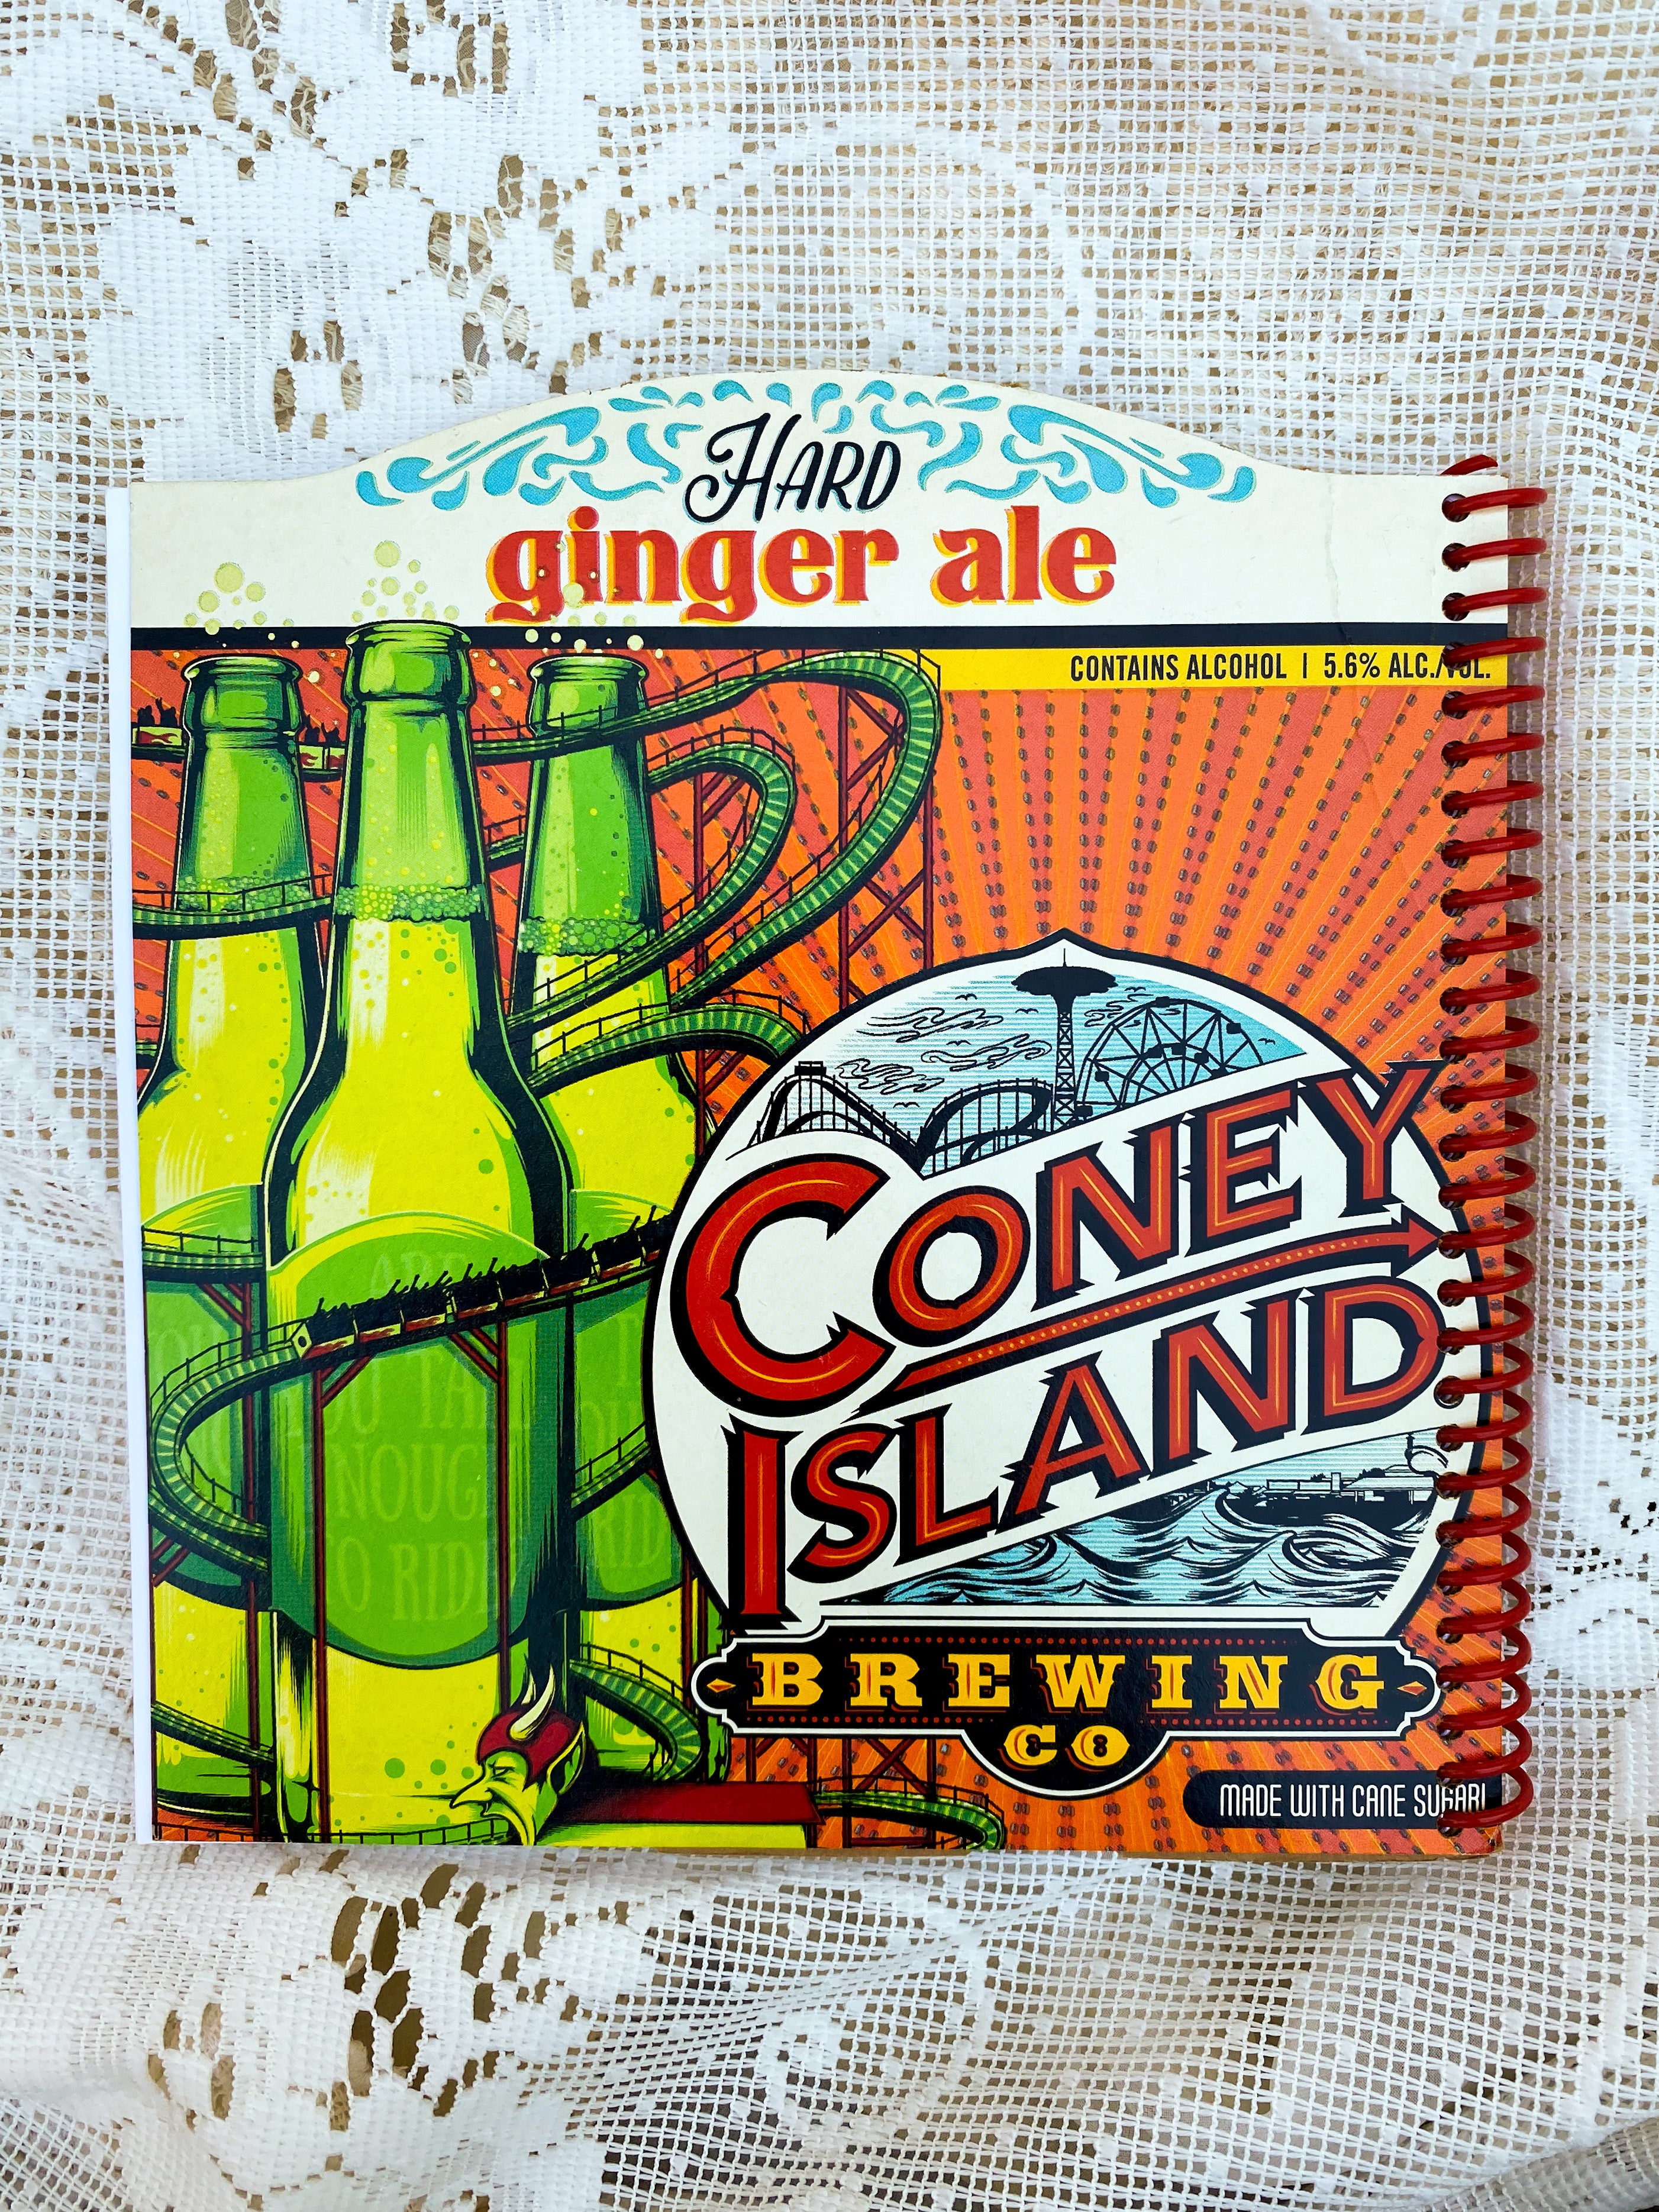 Coney Island Recycled Beer Carton Notebook